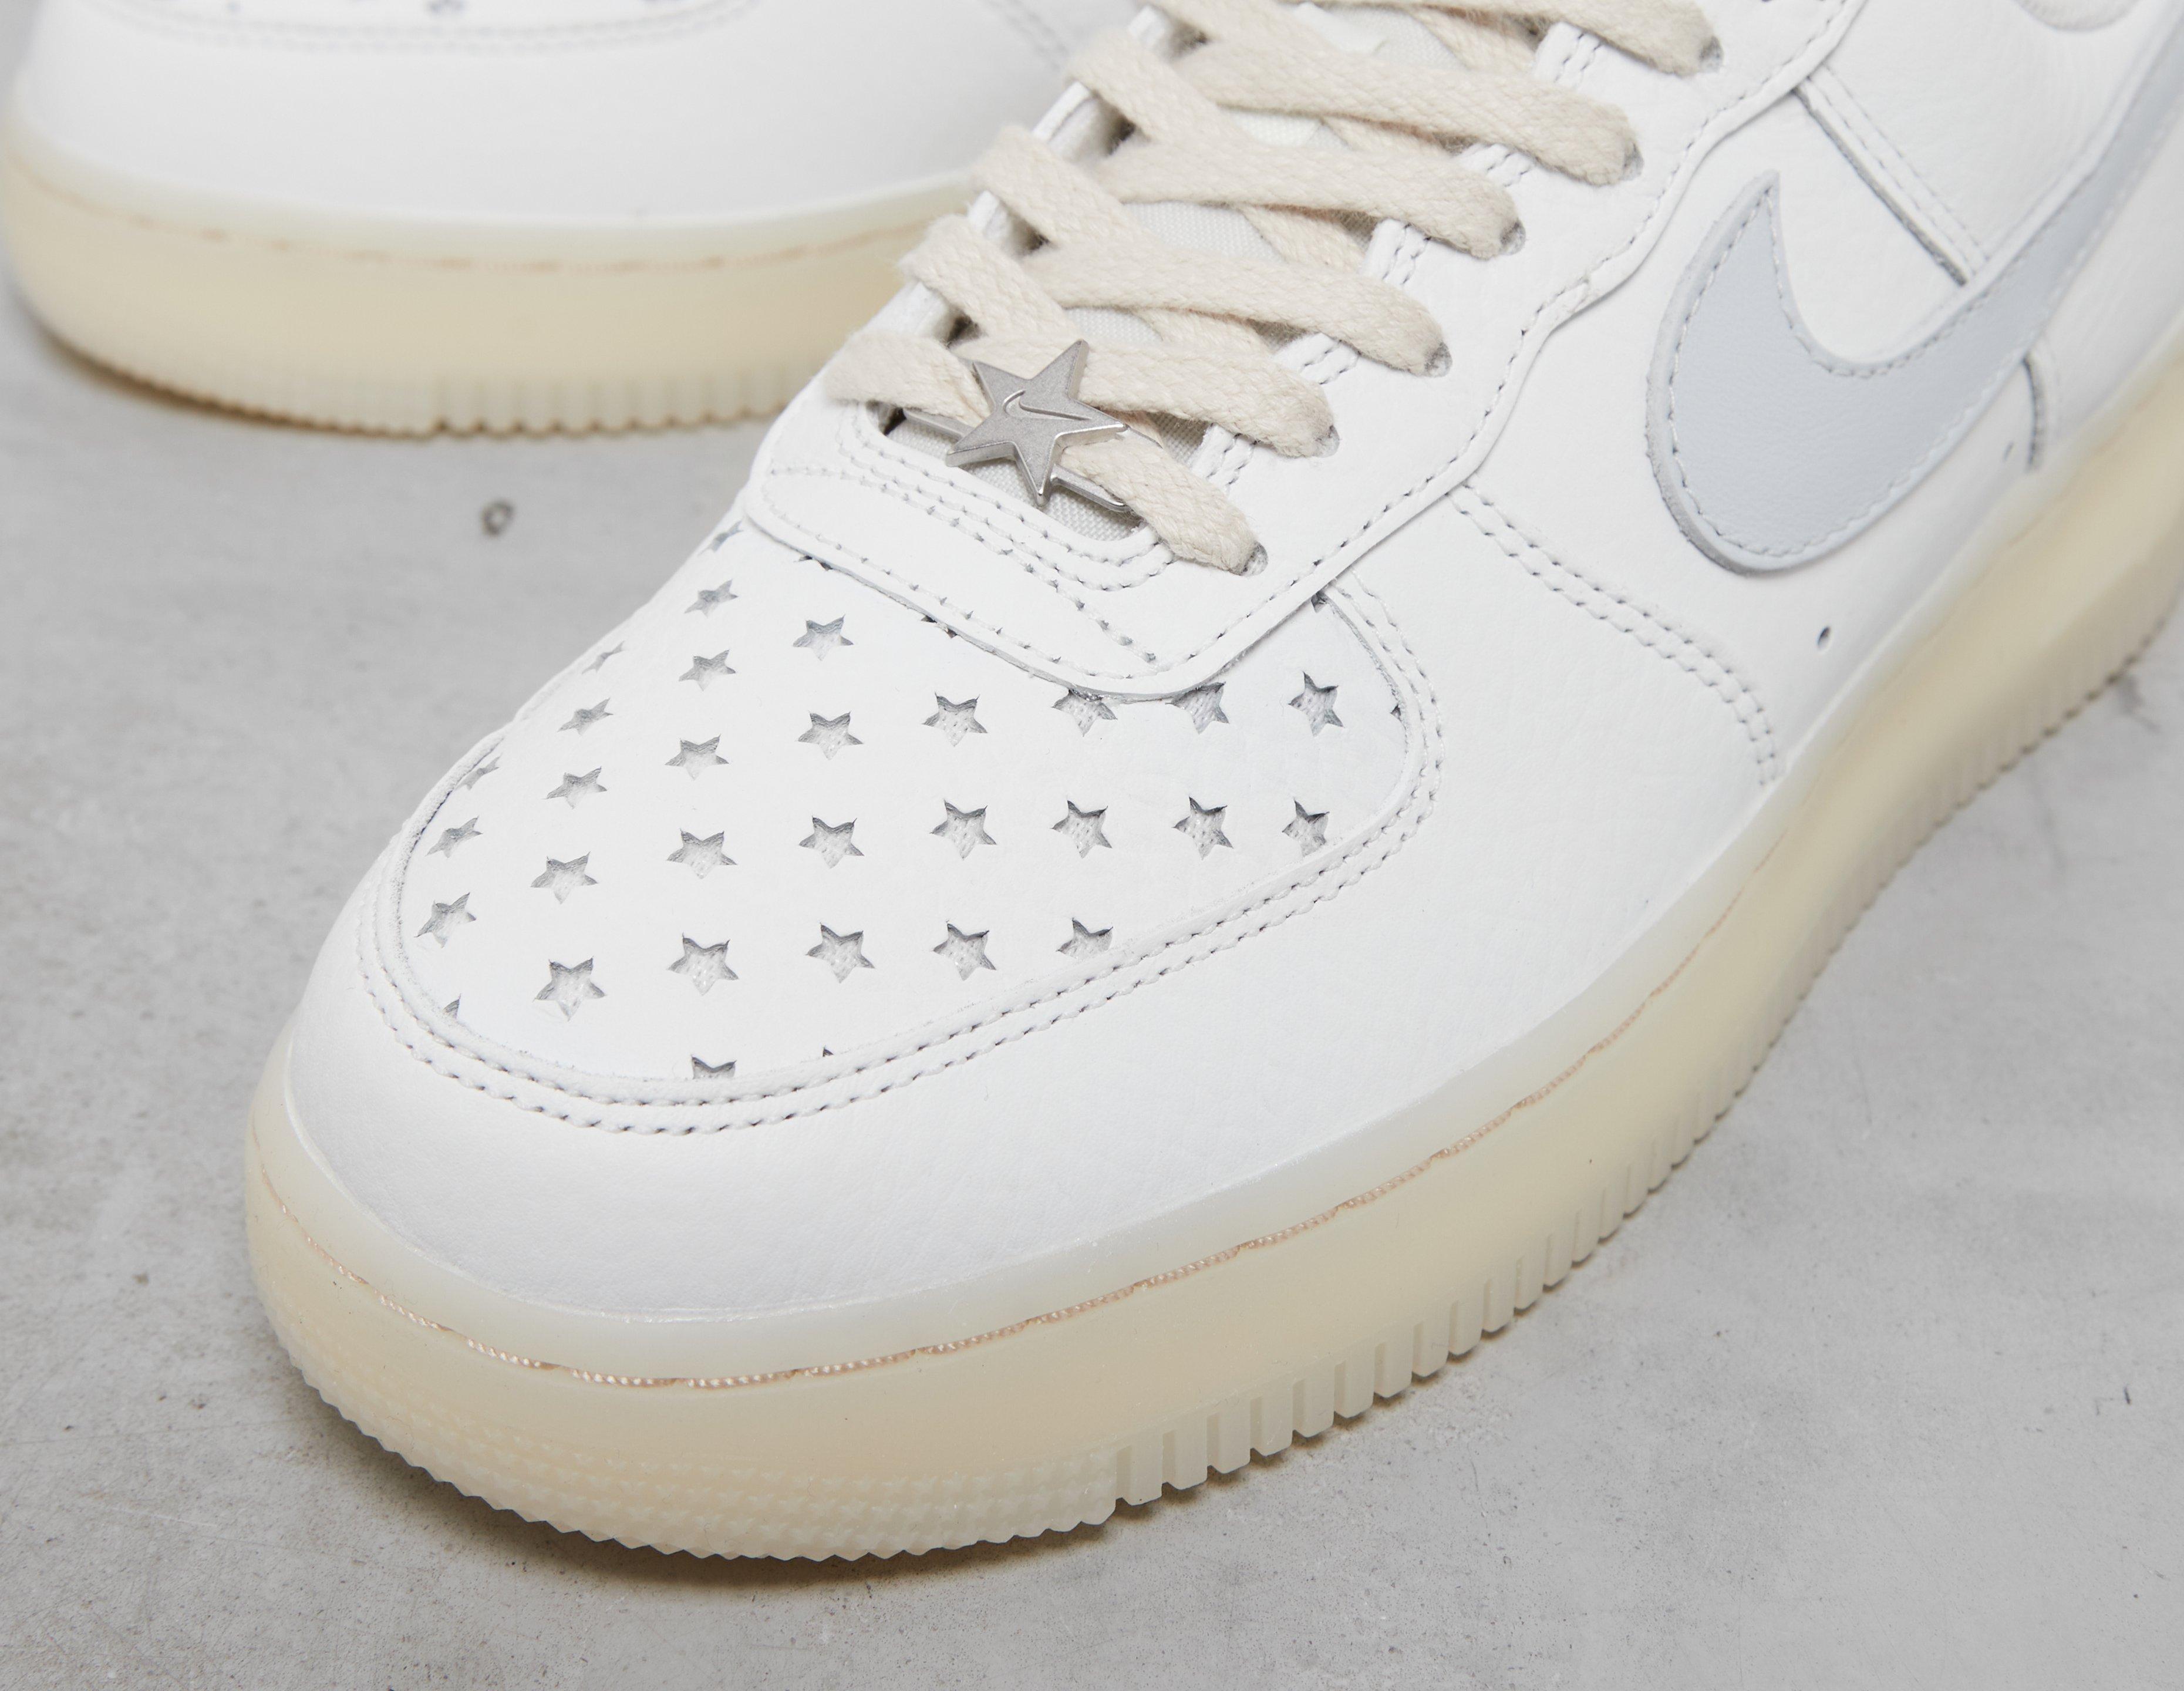 Nike WMNS AIR FORCE 1 '07 'Starry Night' White